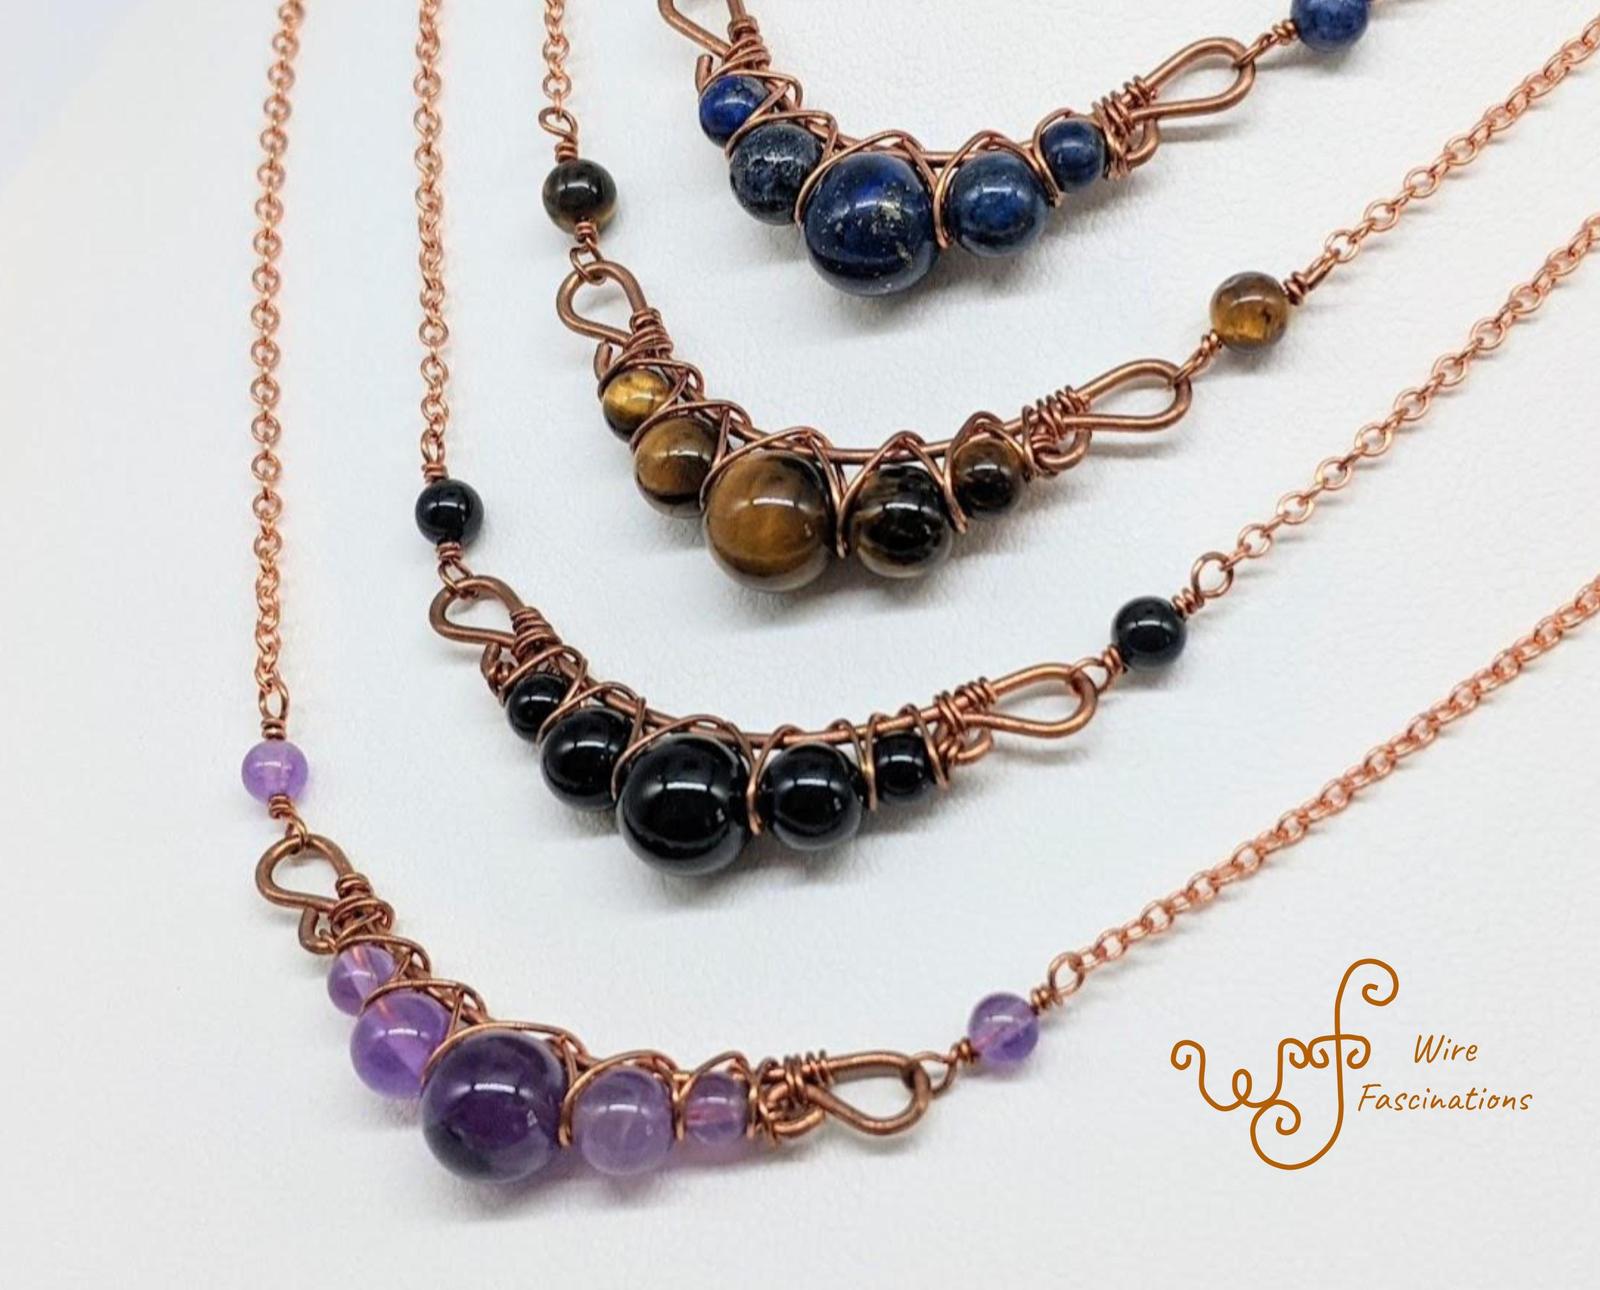 Handmade copper necklace: criss cross copper wire wrapped round stones - $33.00 - $35.00